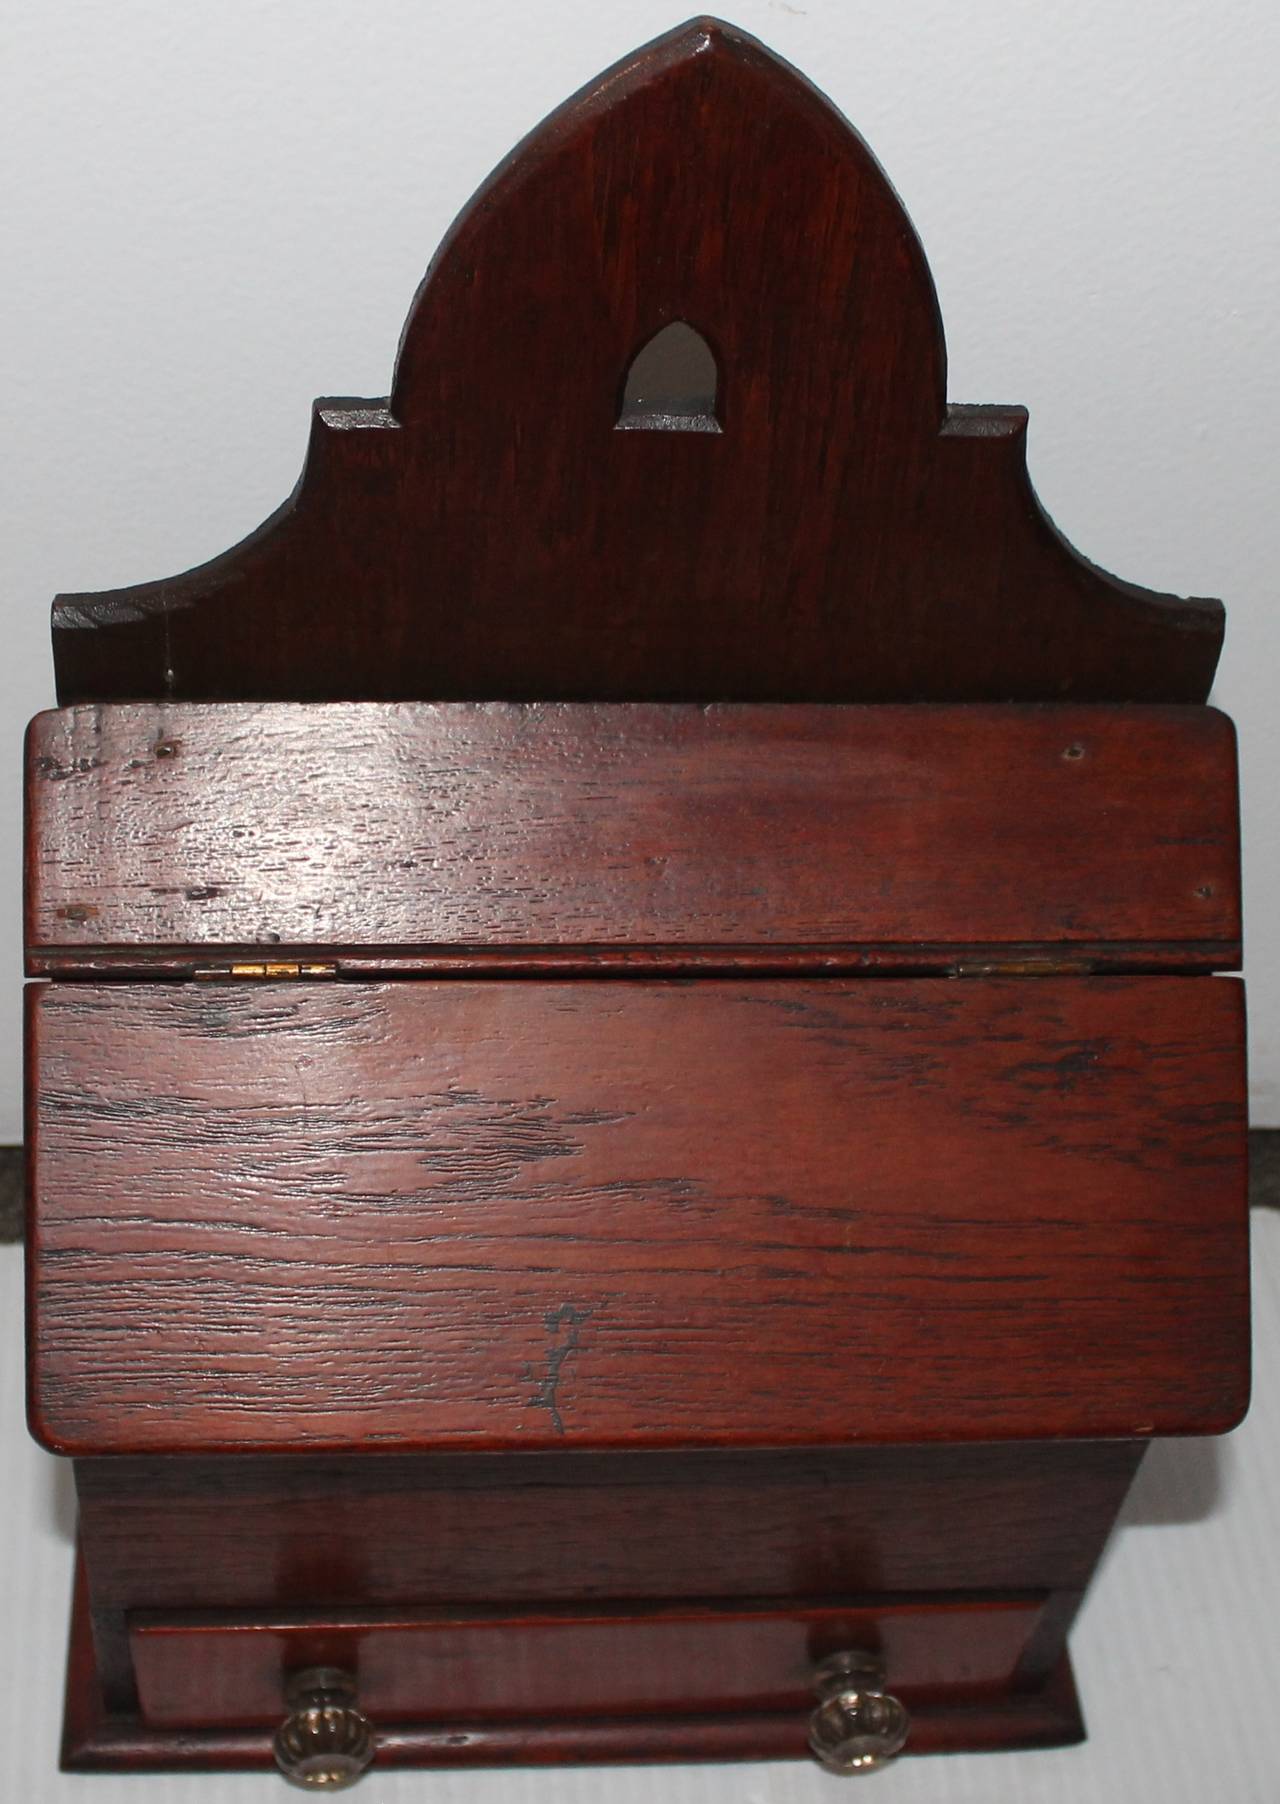 This handmade wall box is made of walnut and is all hand-cut square nail and dovetailed construction. The drawer is dovetailed and retains the original handblown drawer pulls. It was found in Lancaster County, Pennsylvania. The surface is dark and